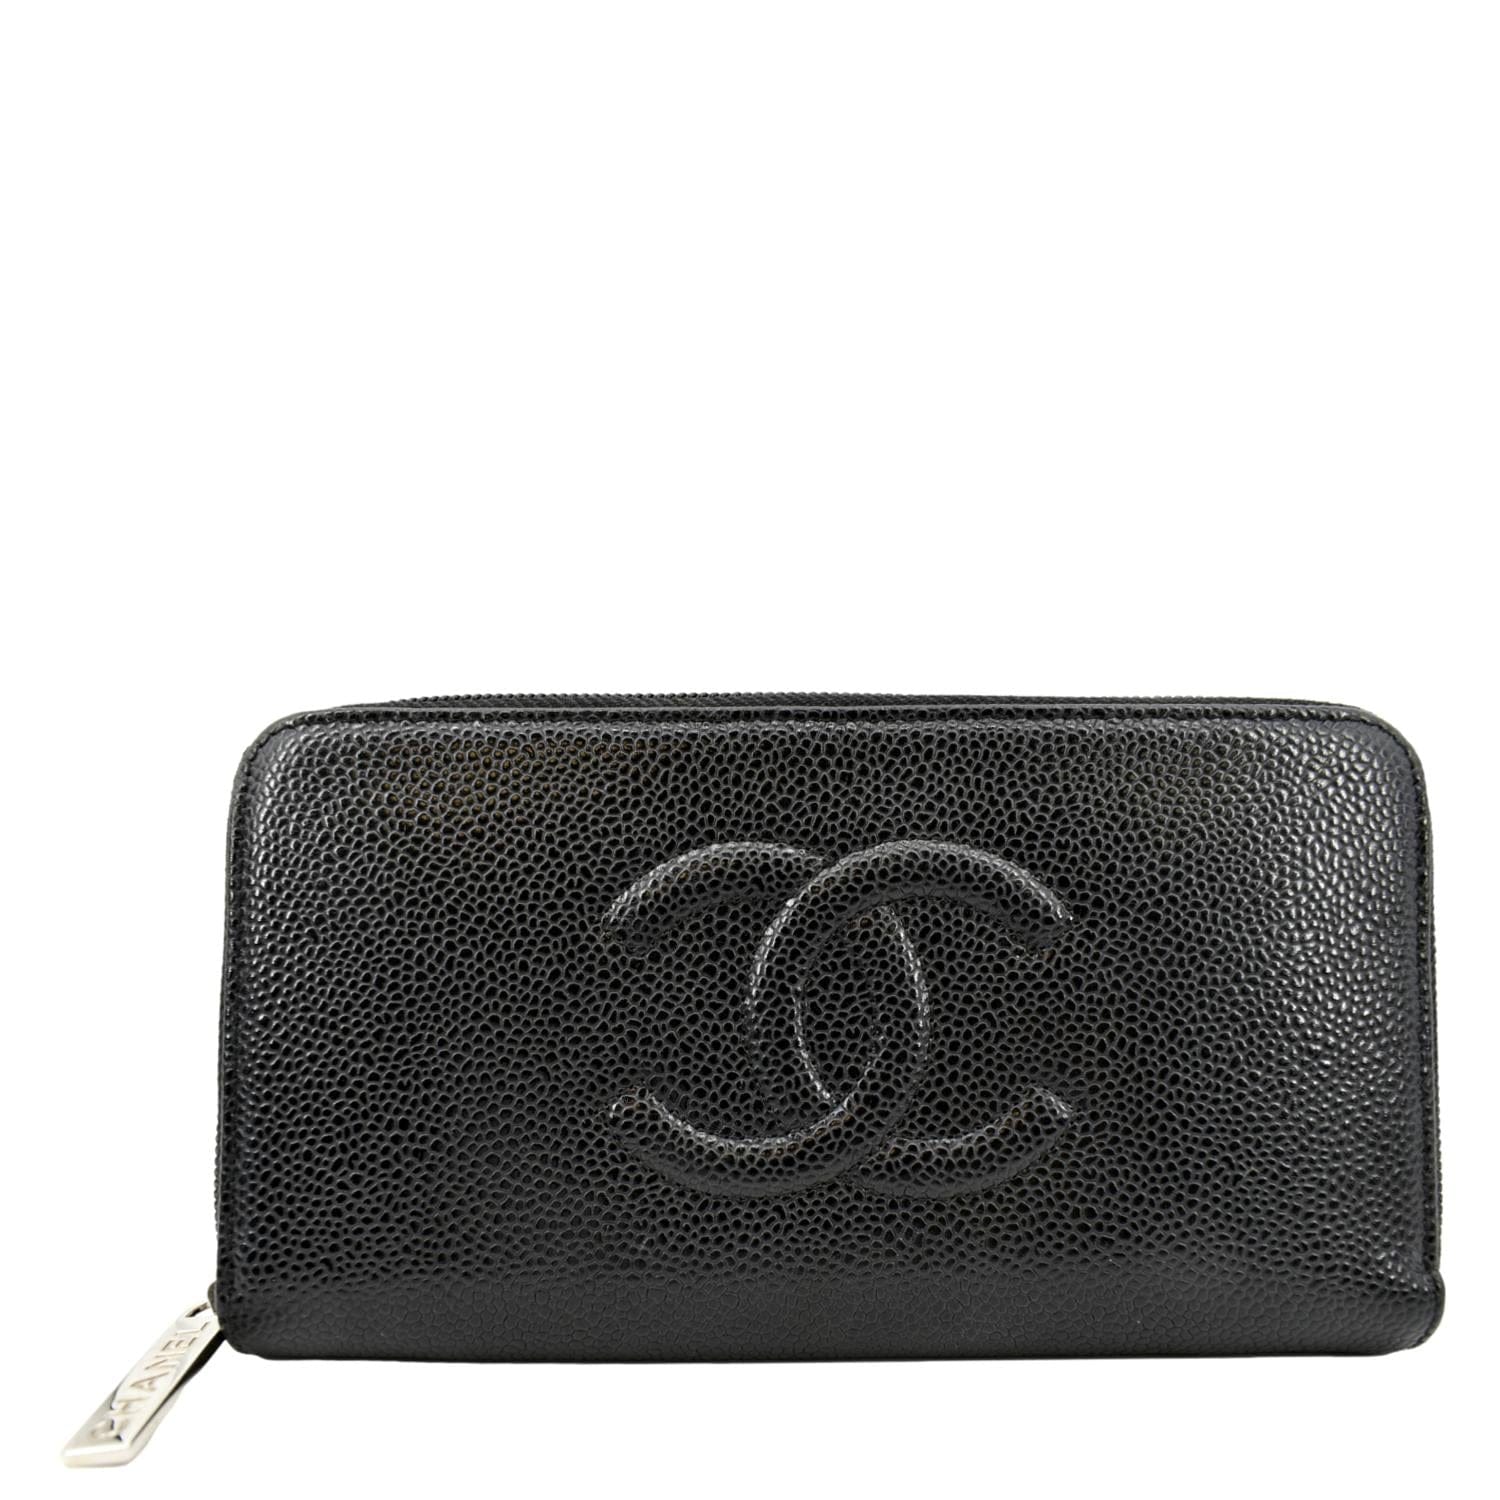 Chanel Black Timeless CC Zipped Around Long Wallet, Designer Brand, Authentic Chanel